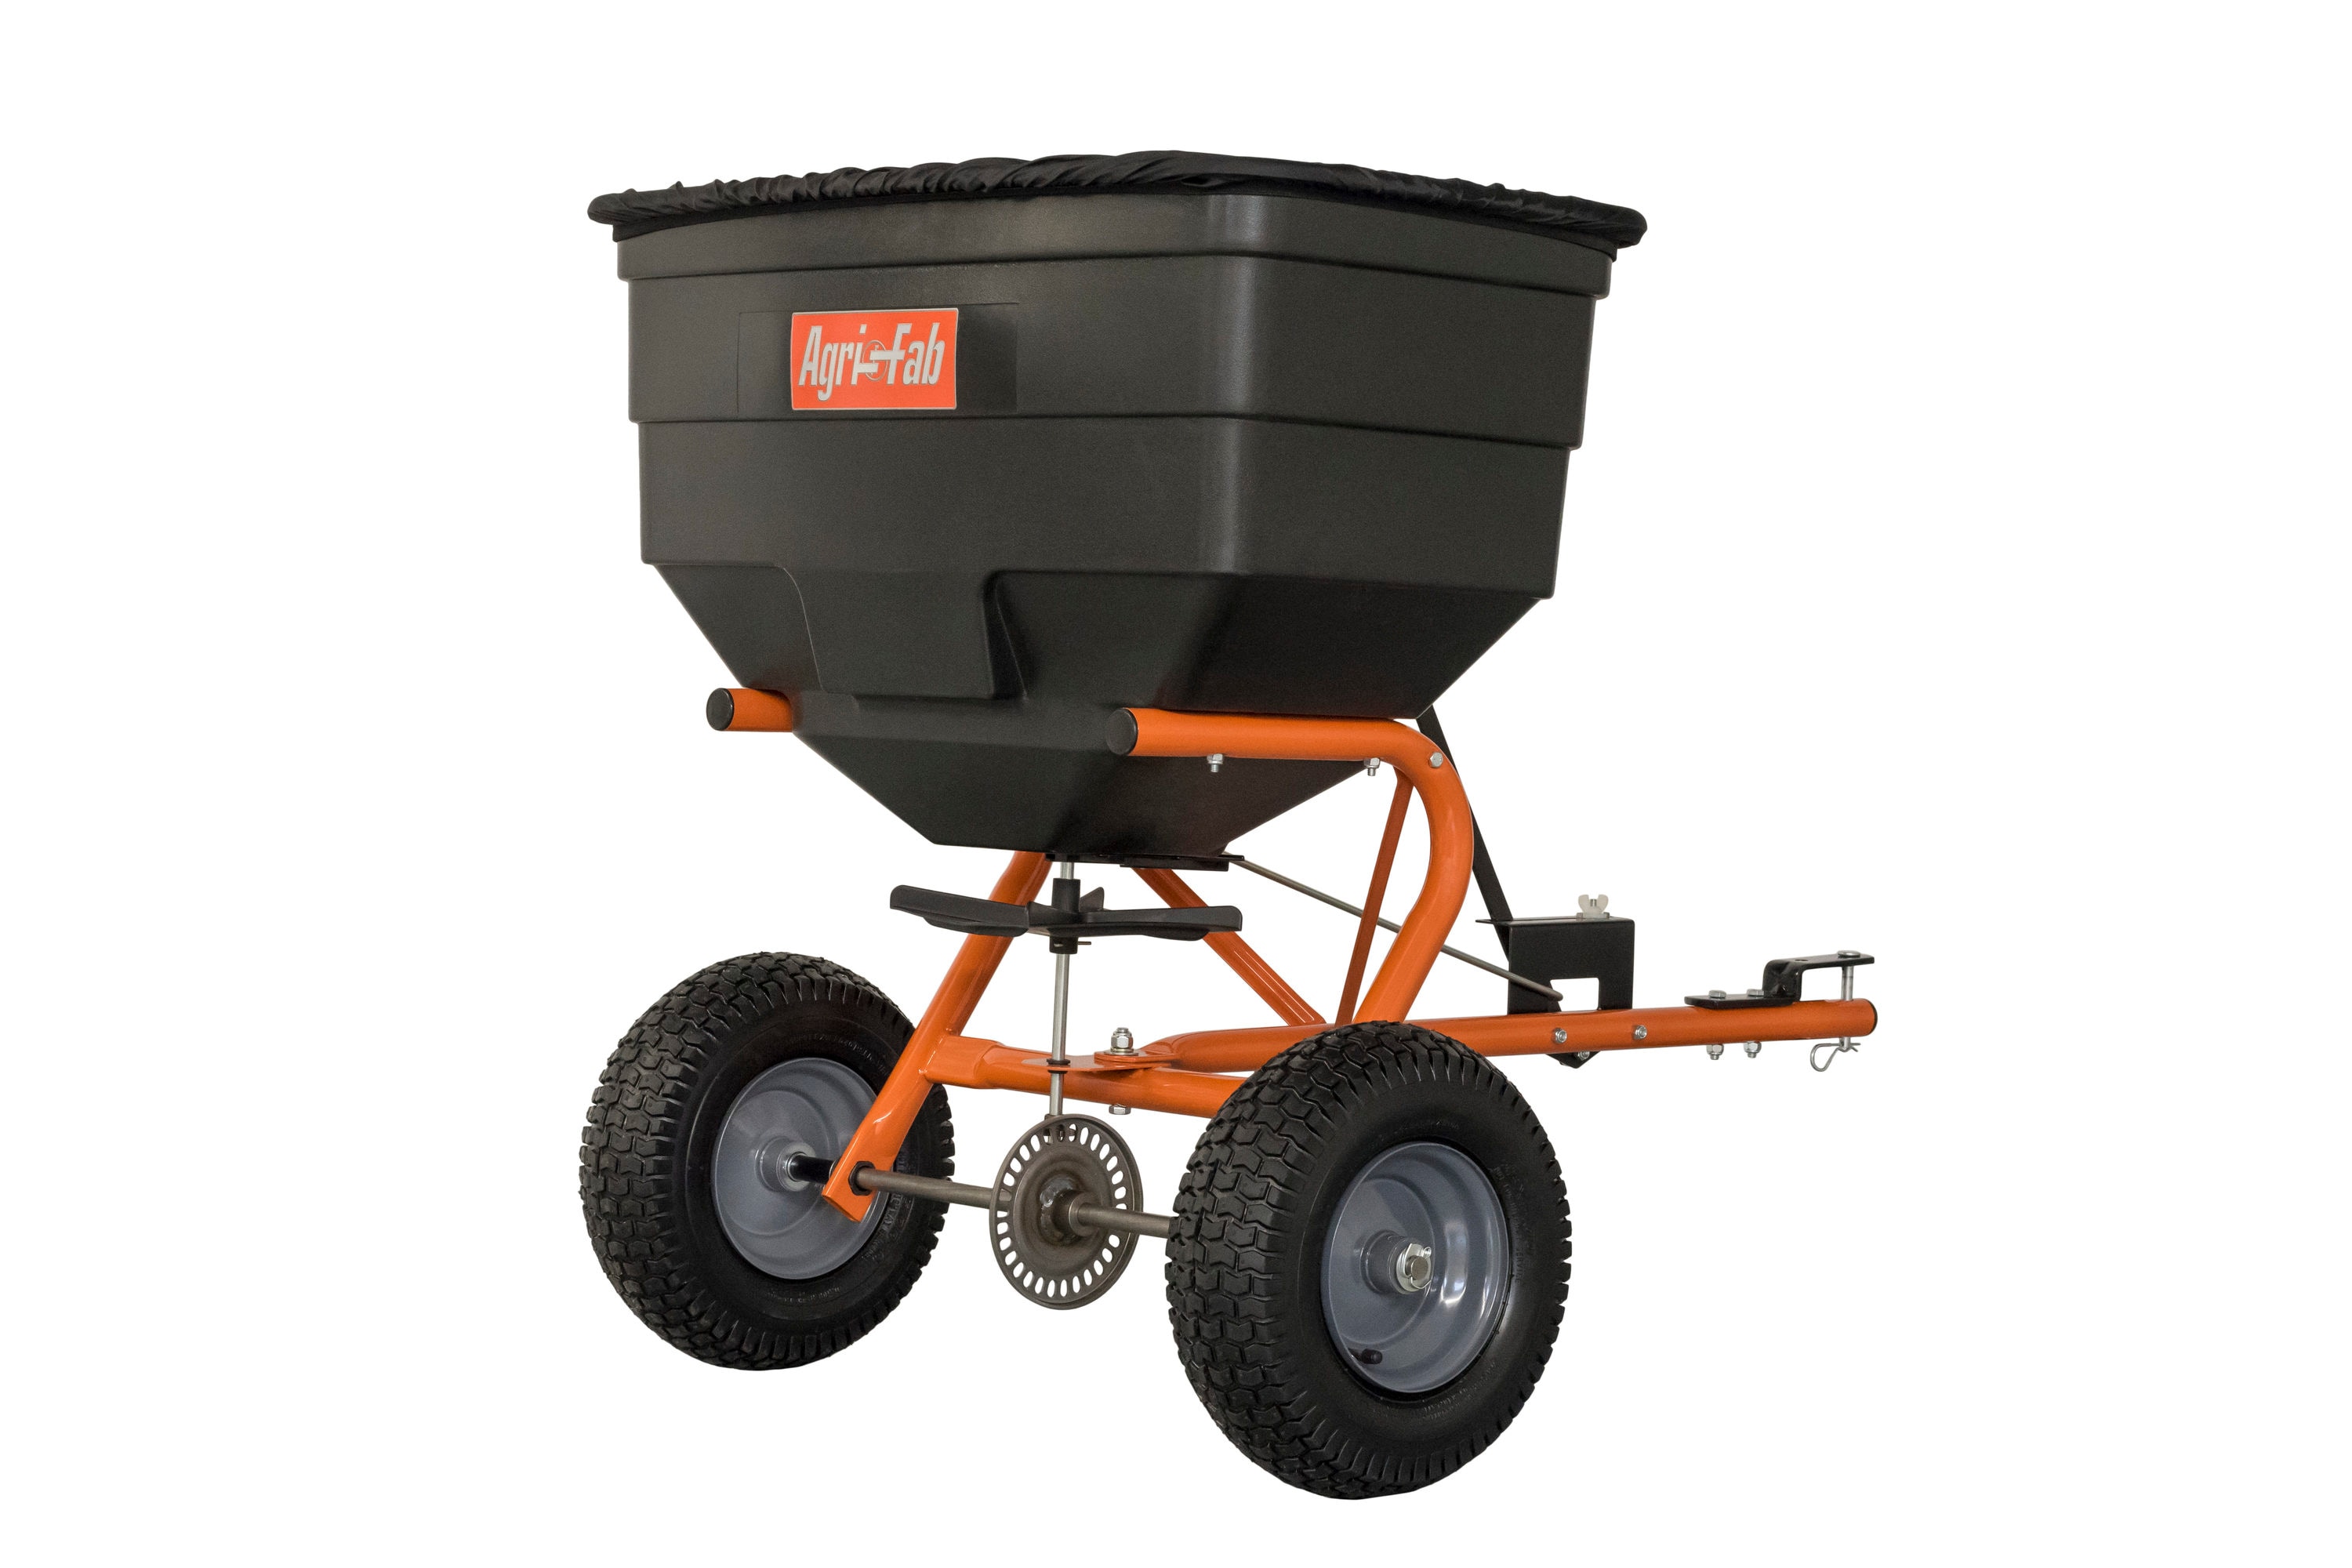 Agri-Fab Agri-fab 185-lb Capacity Tow Spreader at Lowes.com